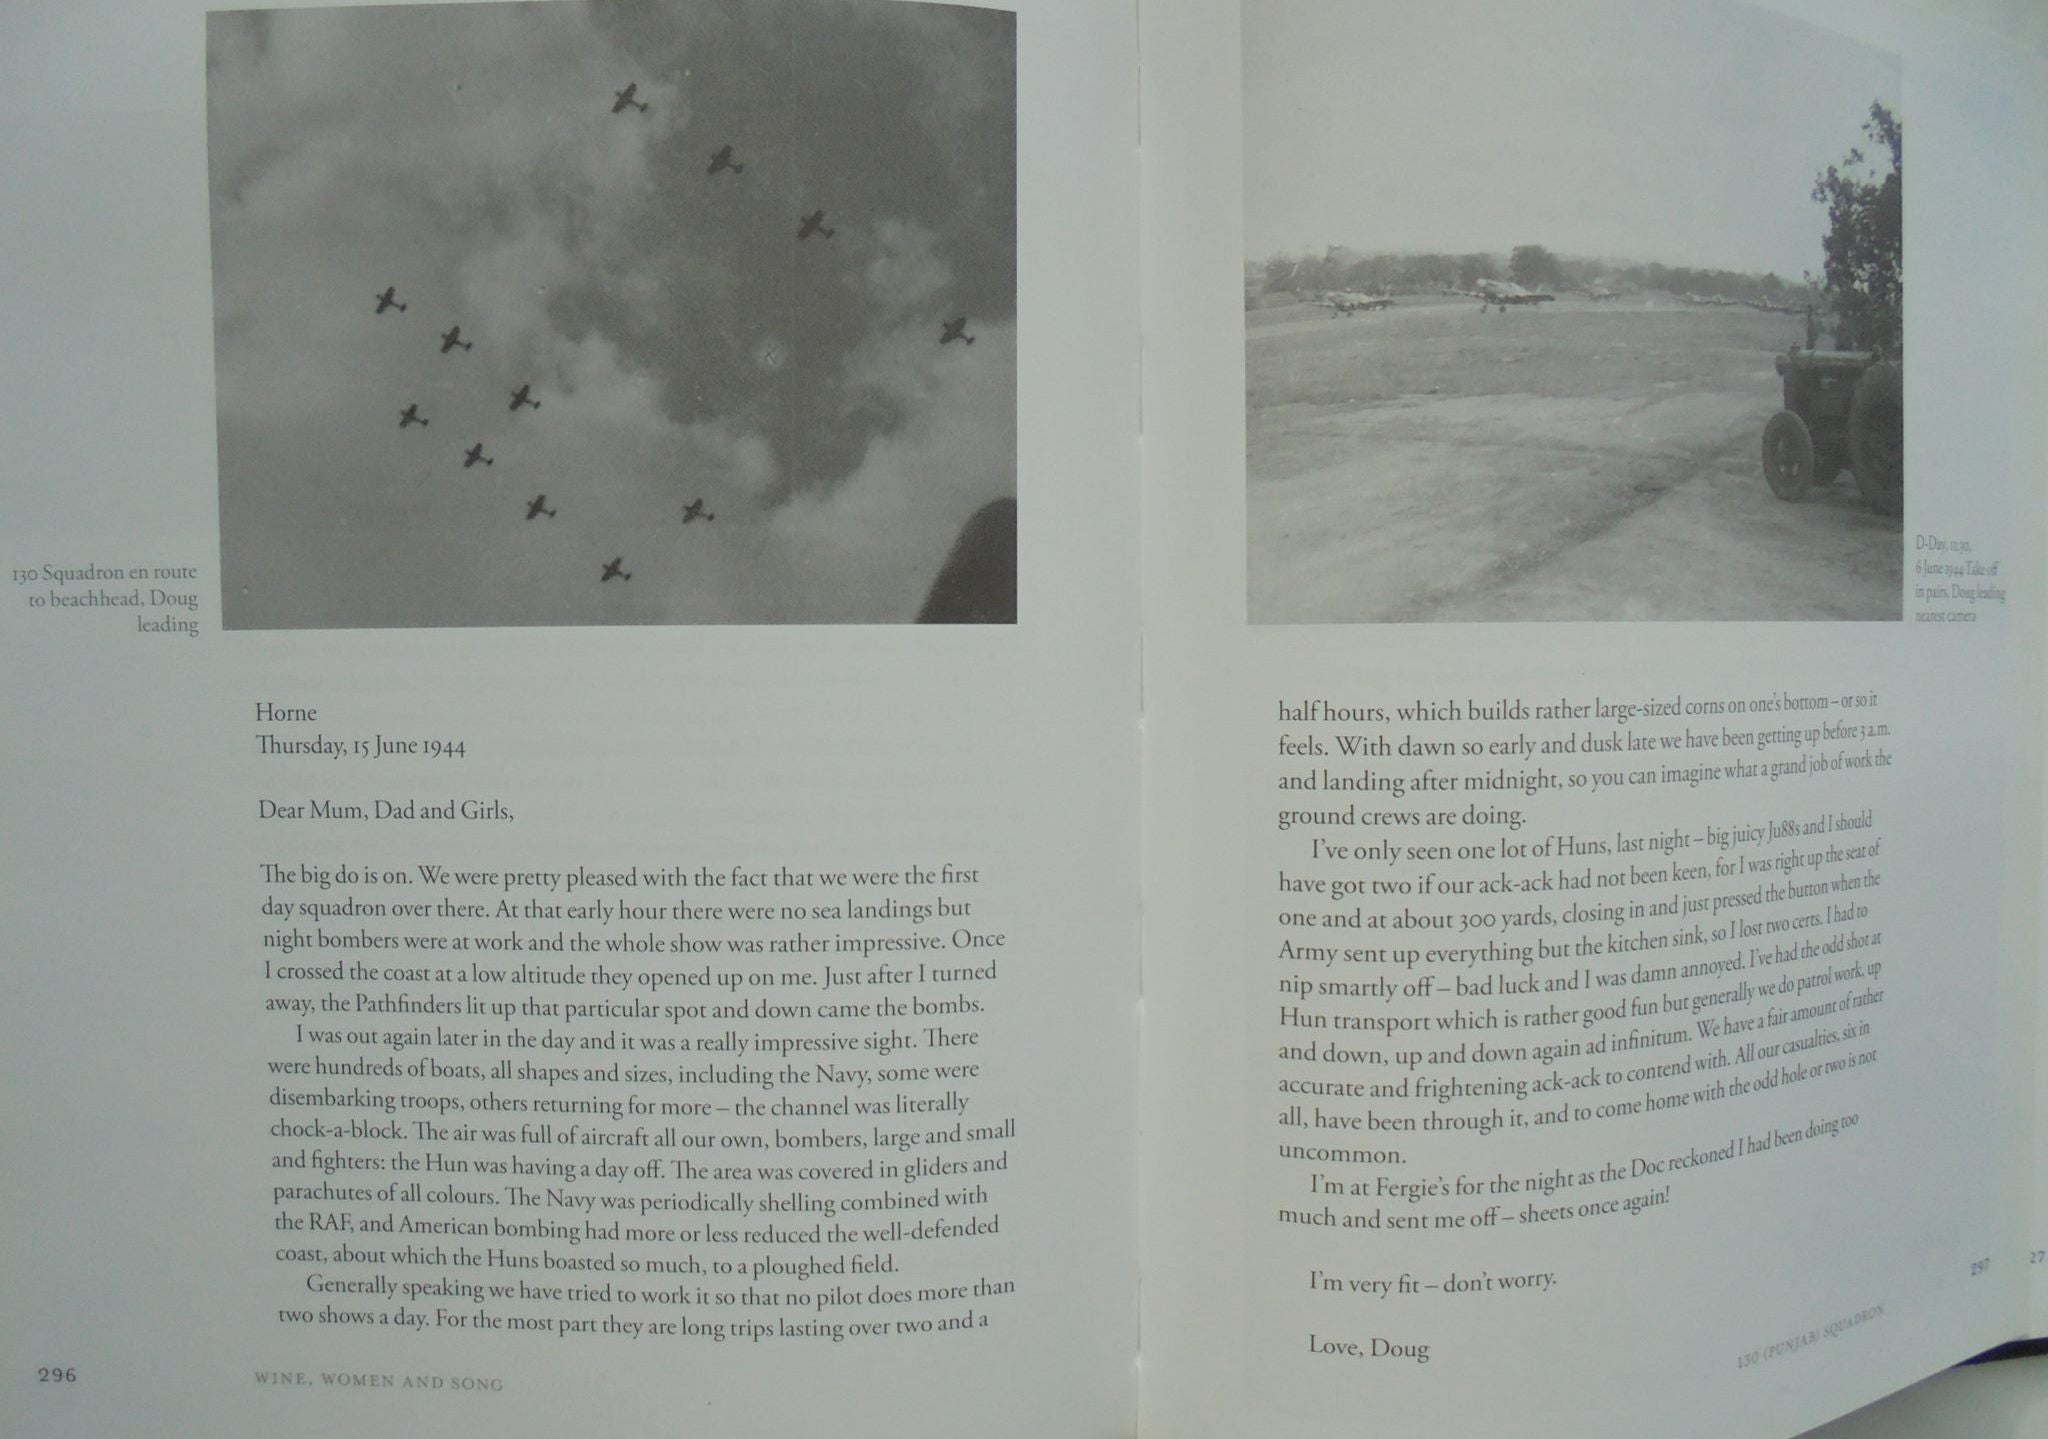 Wine, Women And Song - A Spitfire Pilot's Story by Hamish Brown.